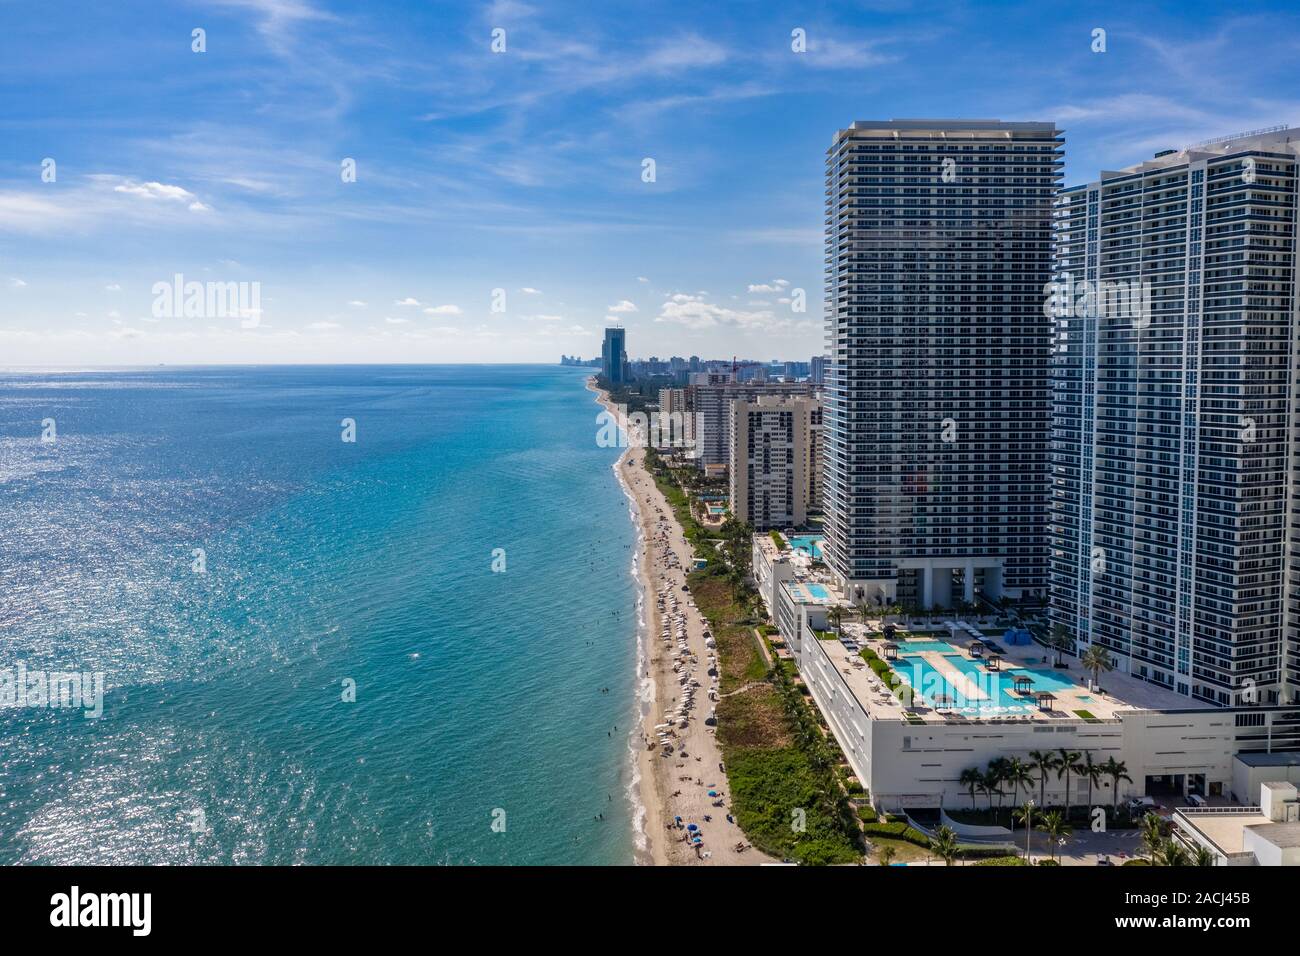 Aerial view of buildings and hotels on the beach in Miami Beach, Florida Stock Photo